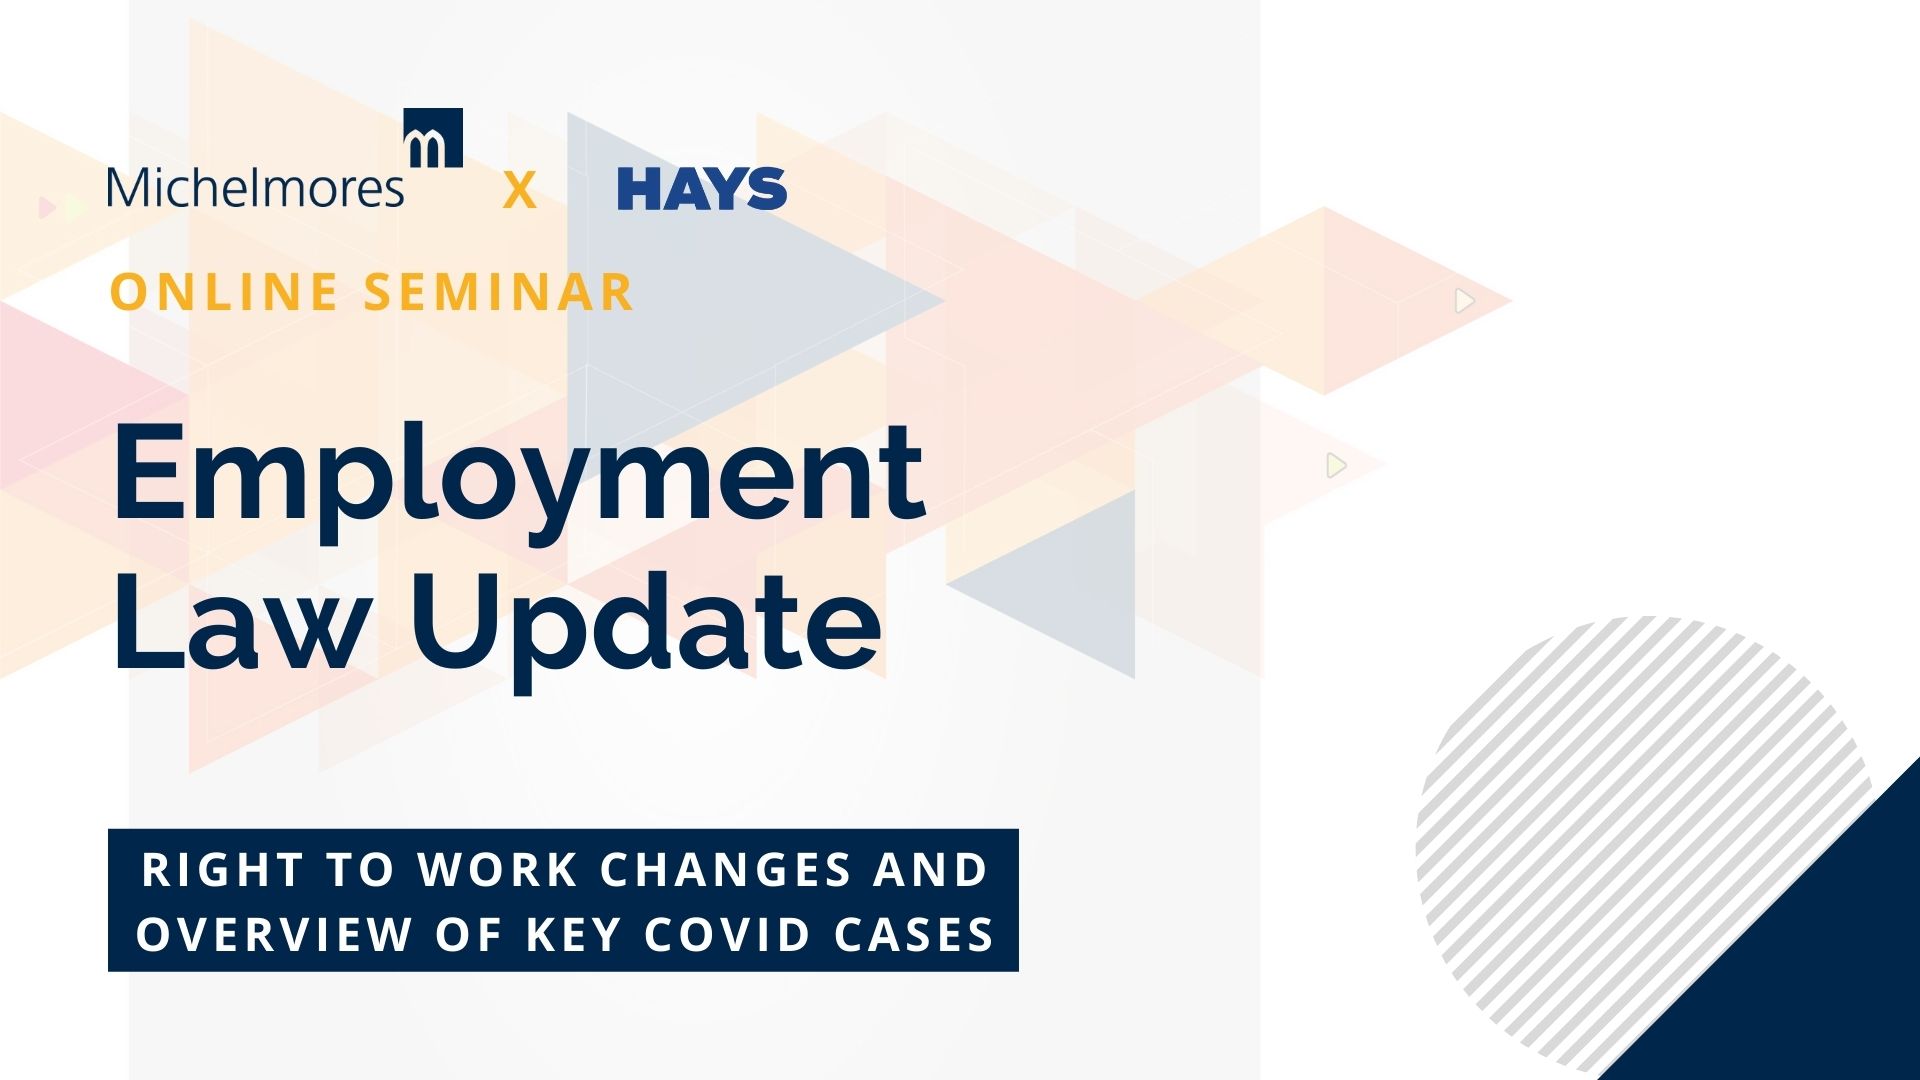 Right to Work Changes and Overview of Key COVID Cases